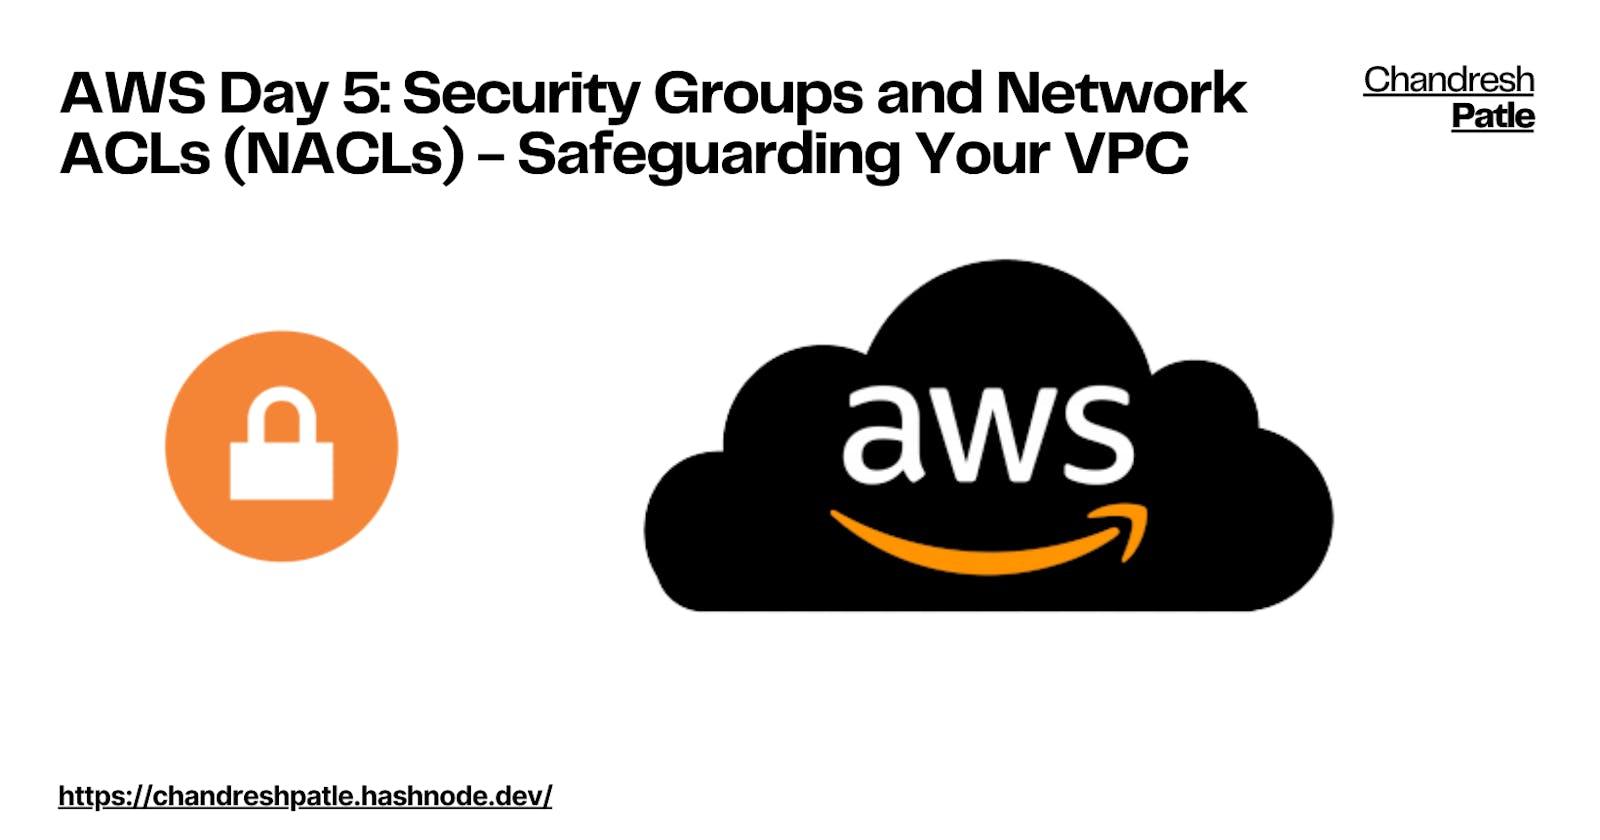 AWS Day 5: Security Groups and Network ACLs (NACLs) - Safeguarding Your VPC